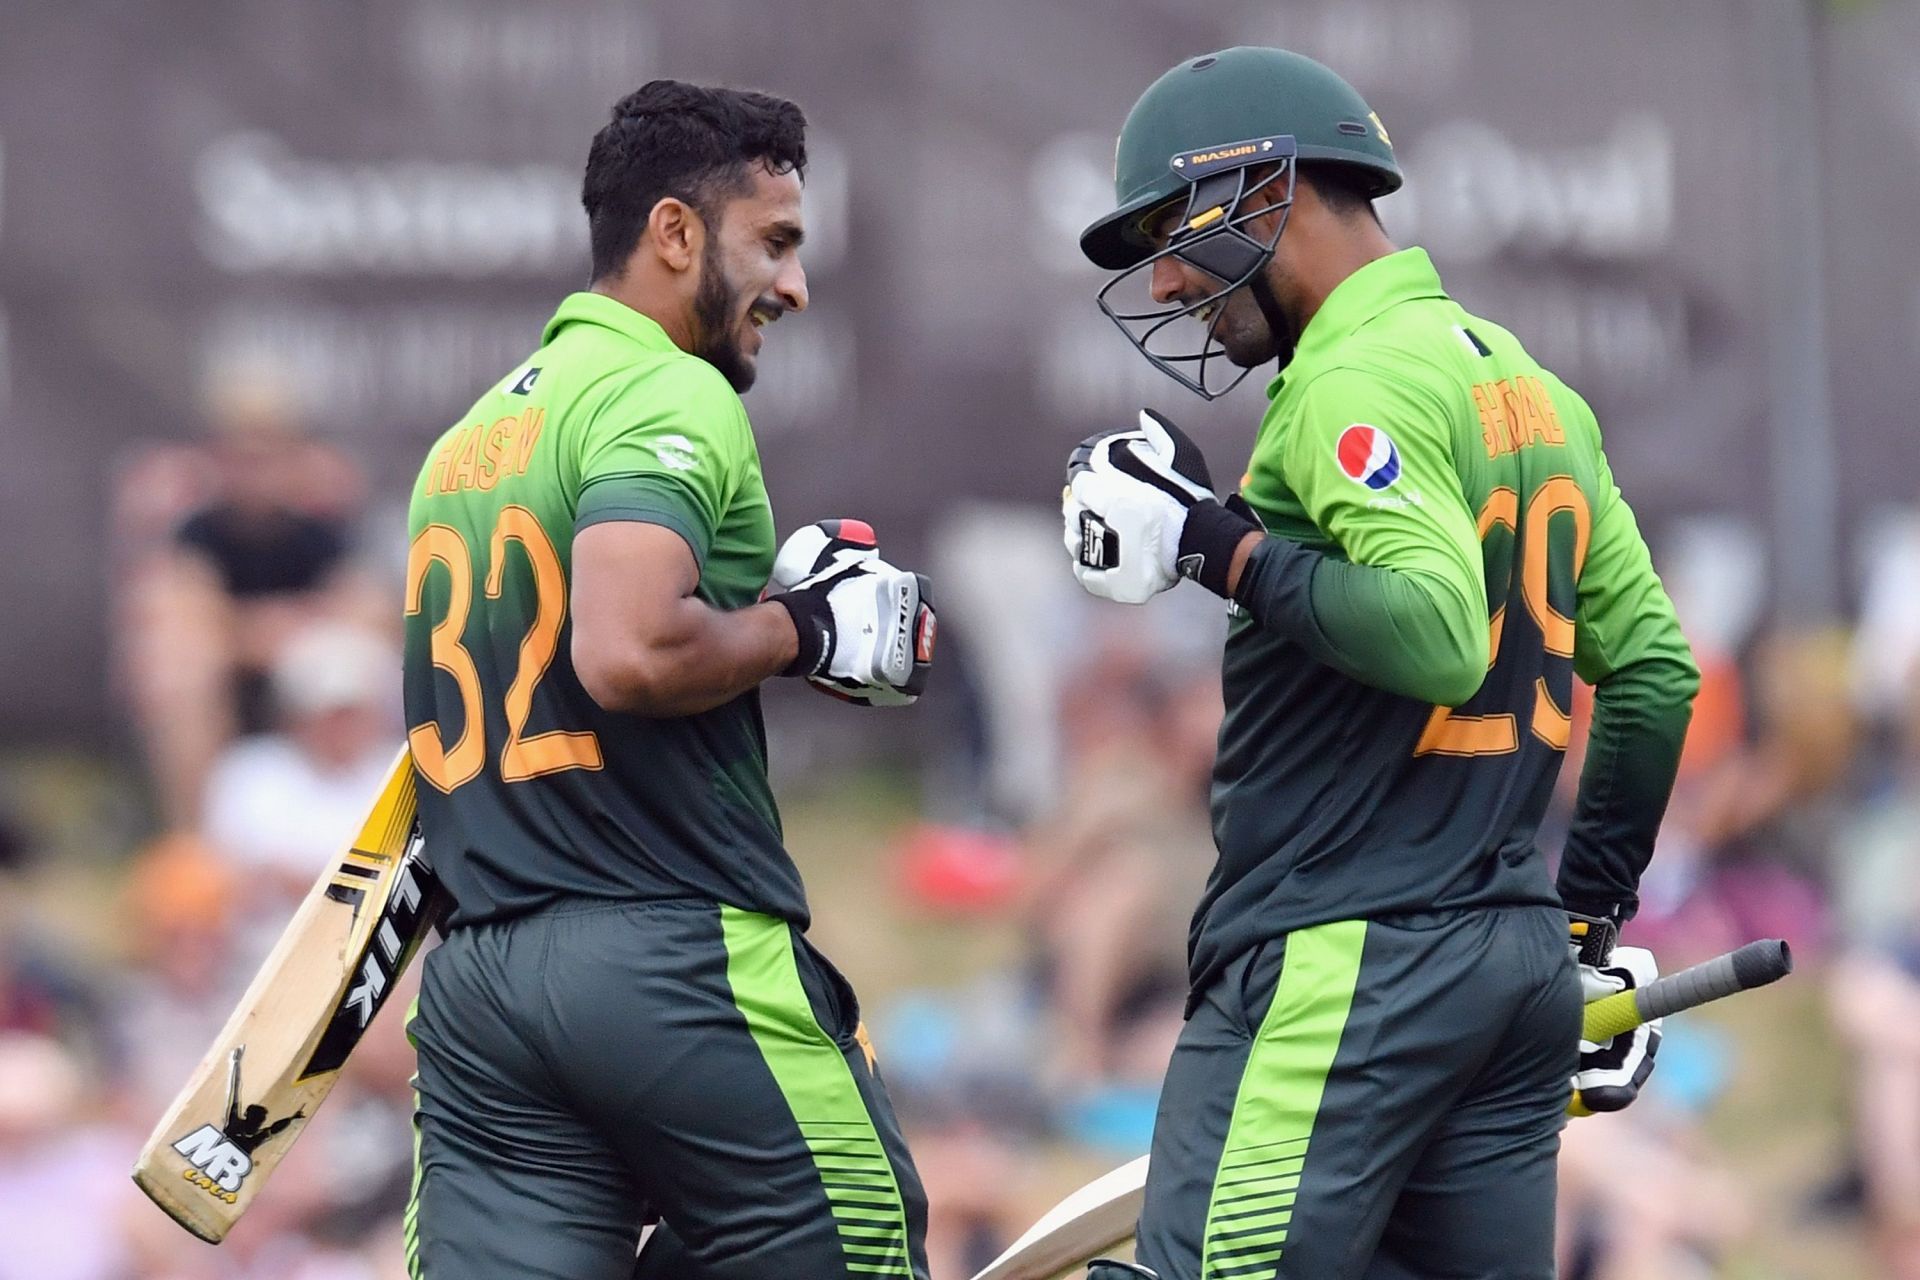 Hasan Ali and Shadab Khan played for Pakistan in ICC T20 World Cup 2021